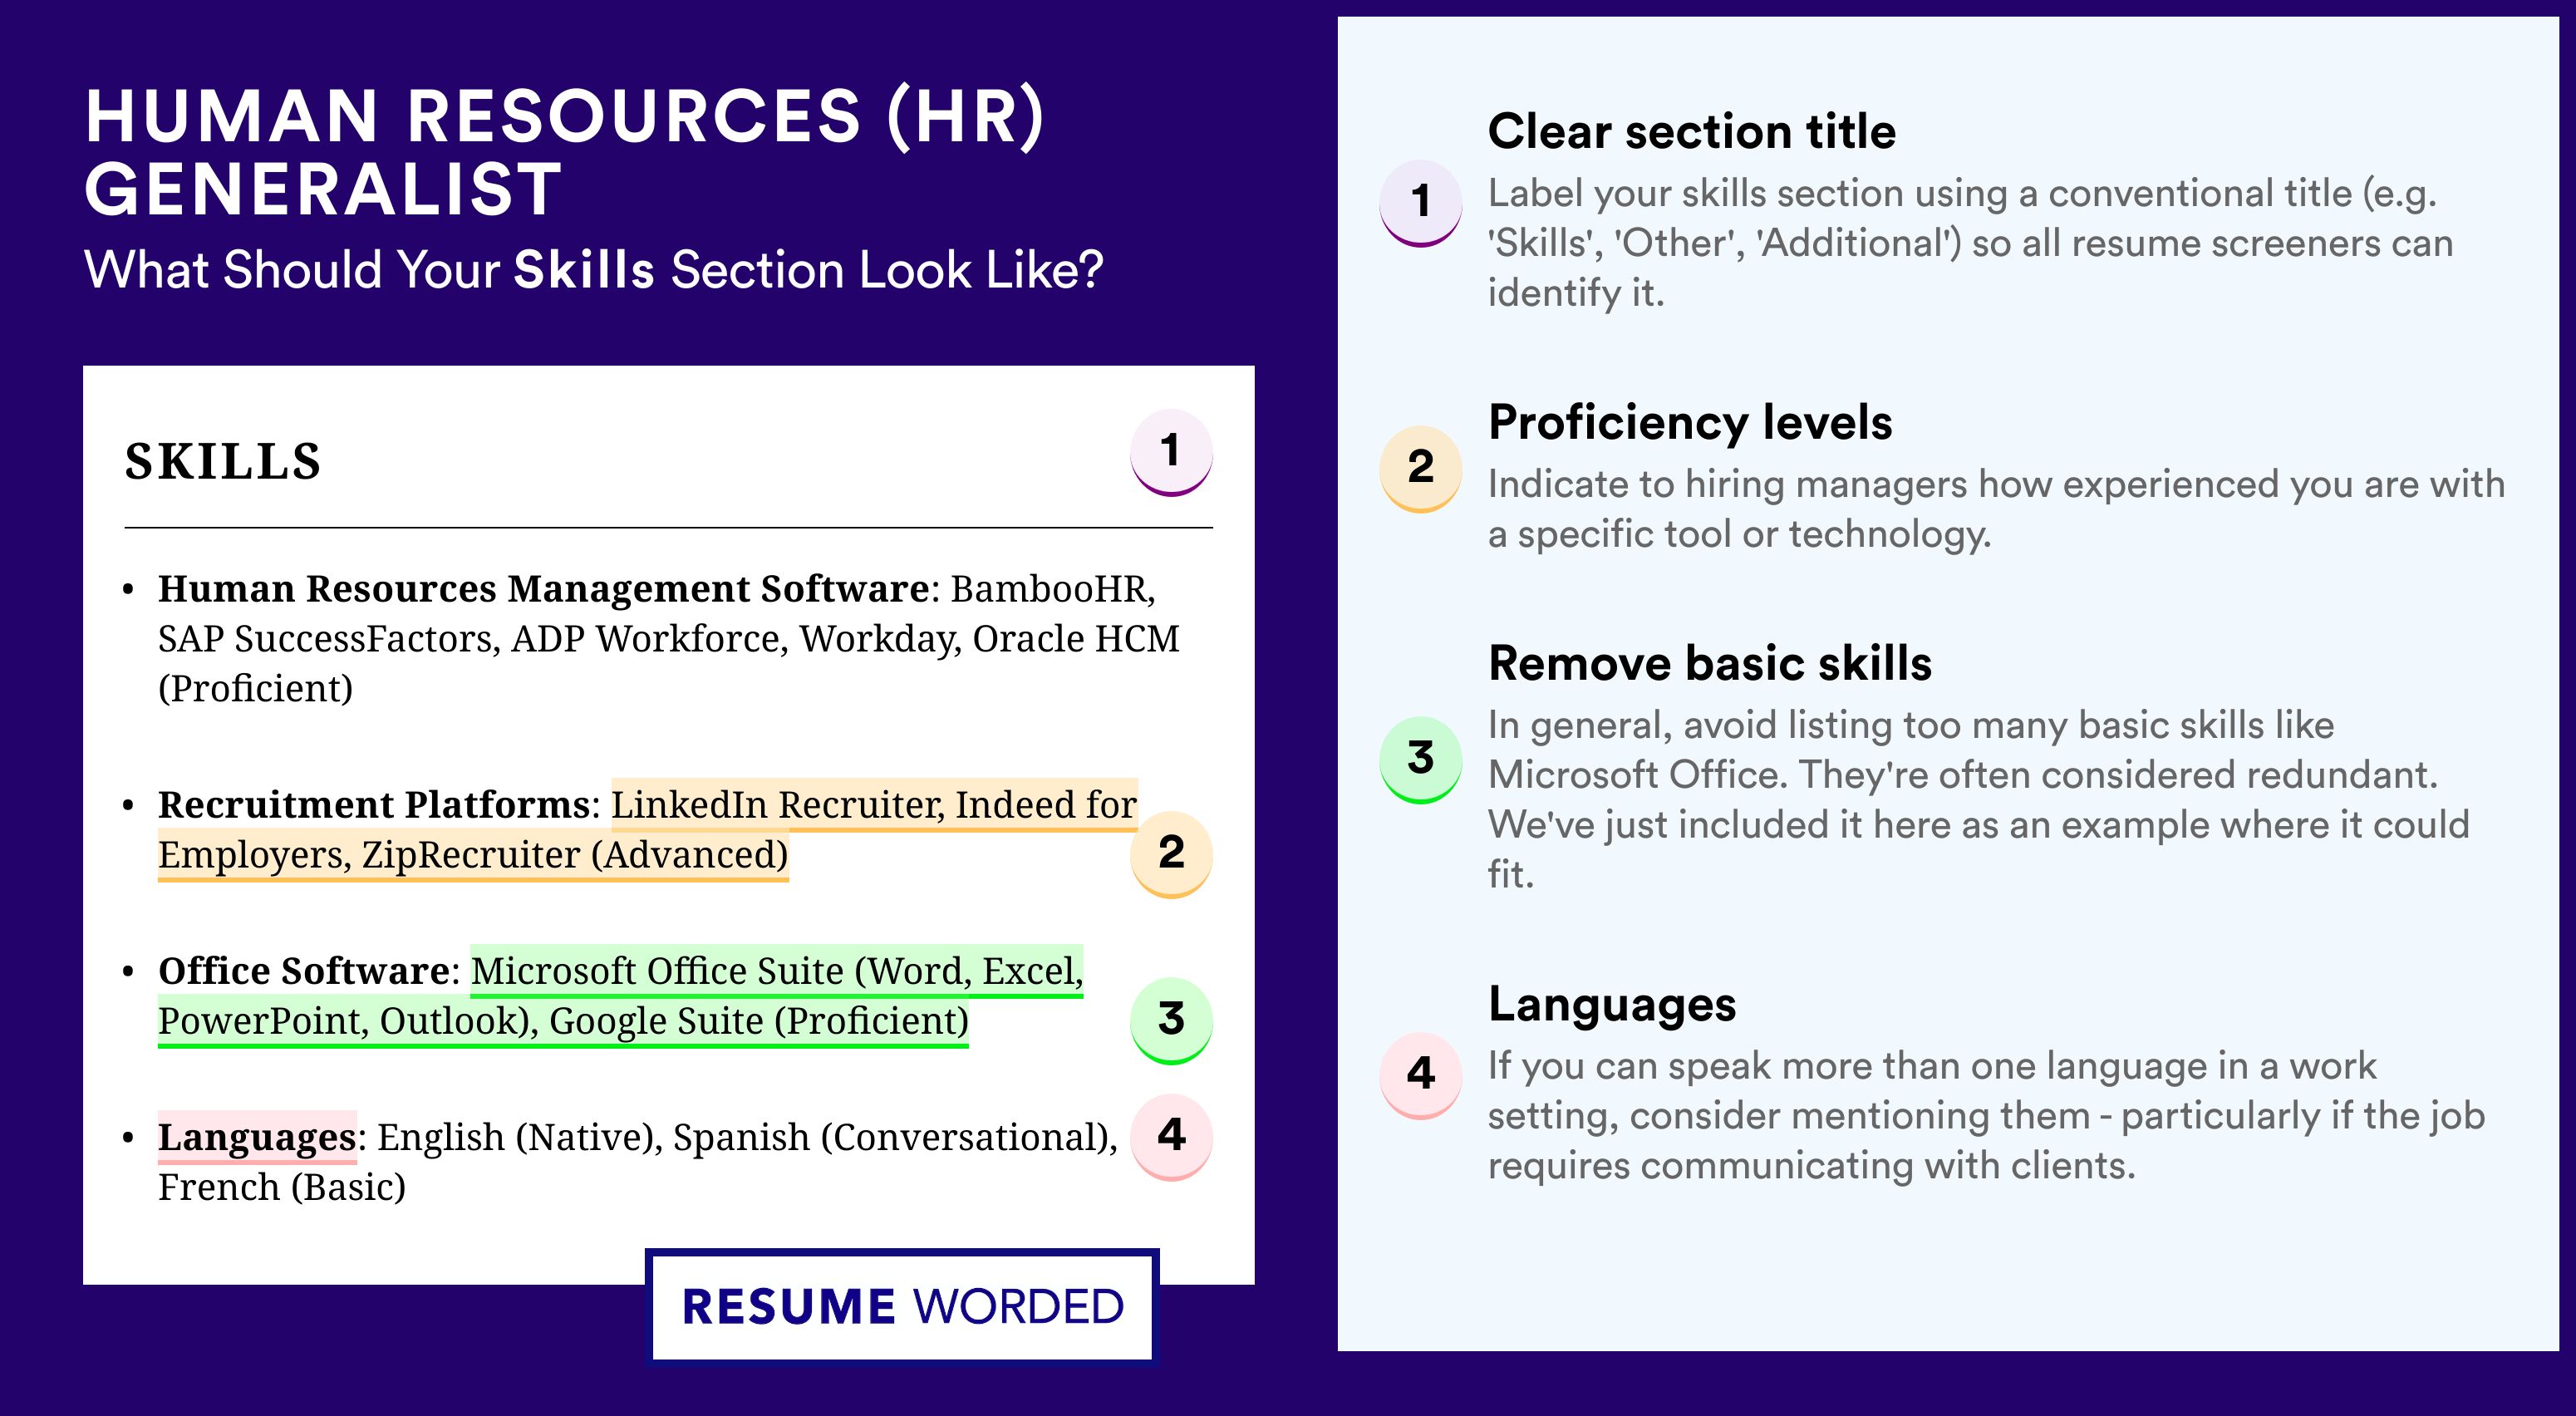 How To Write Your Skills Section - Human Resources (HR) Generalist Roles